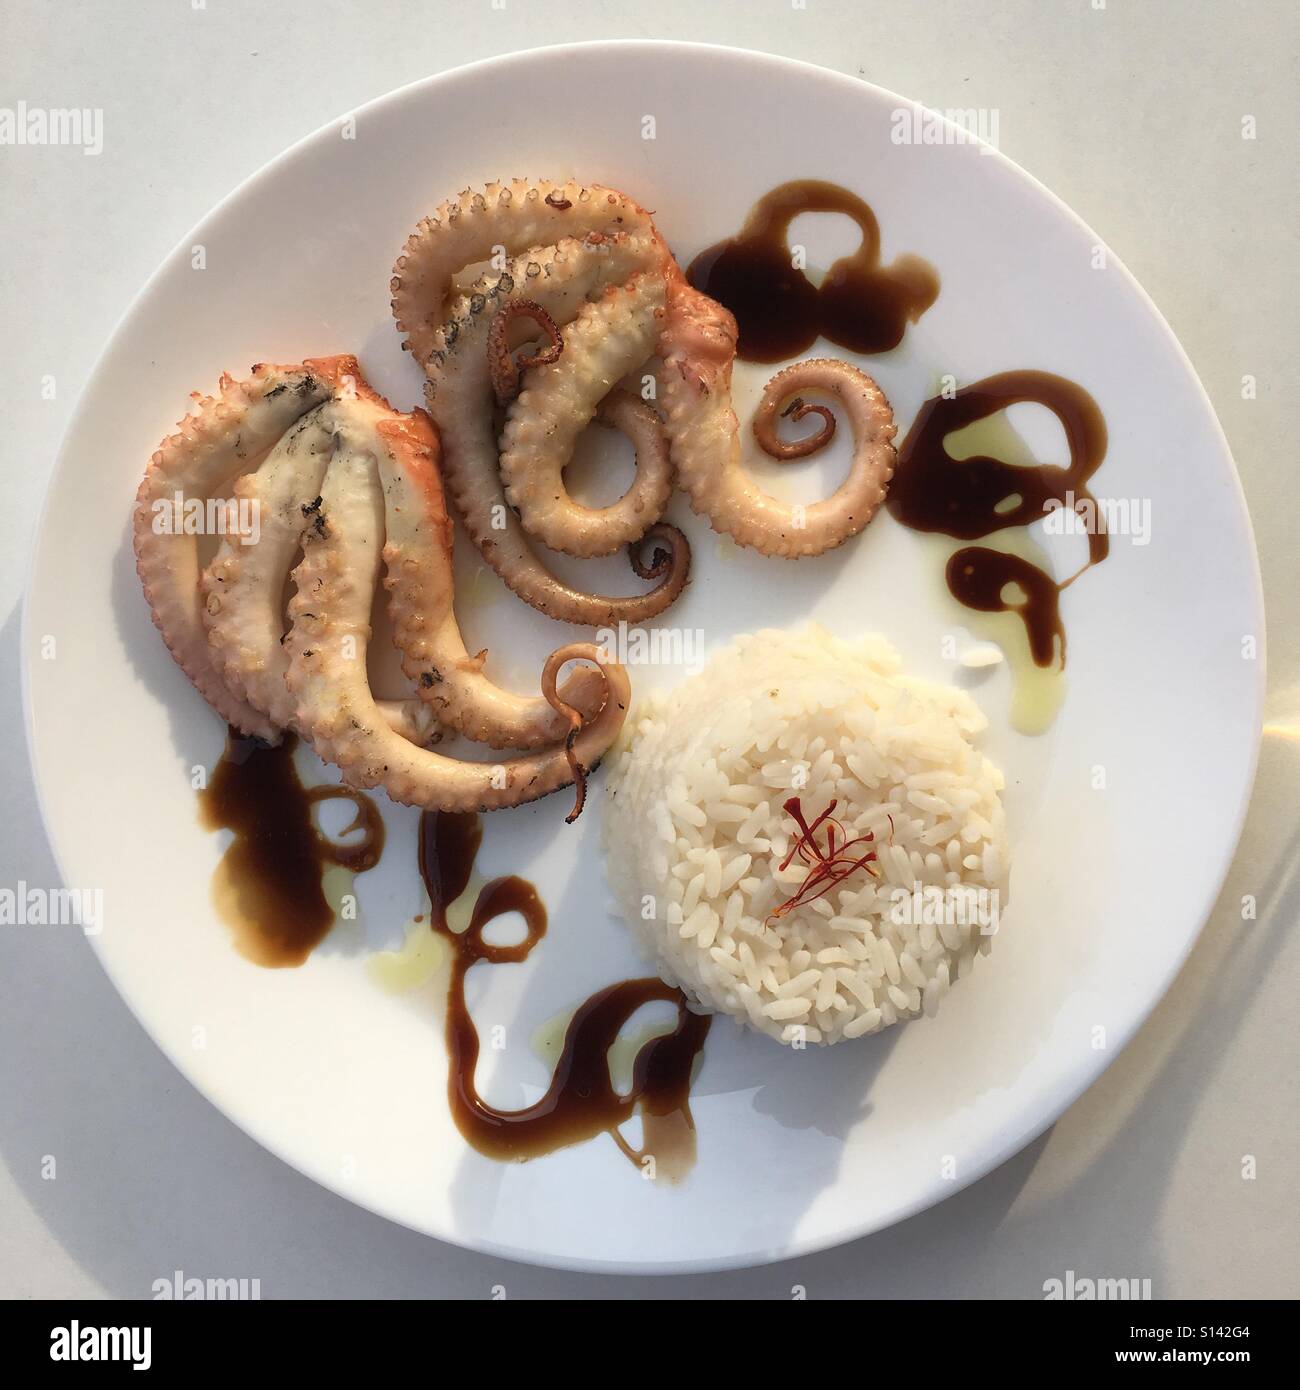 Grilled octopus with a side of rice topped with Saffron Stock Photo